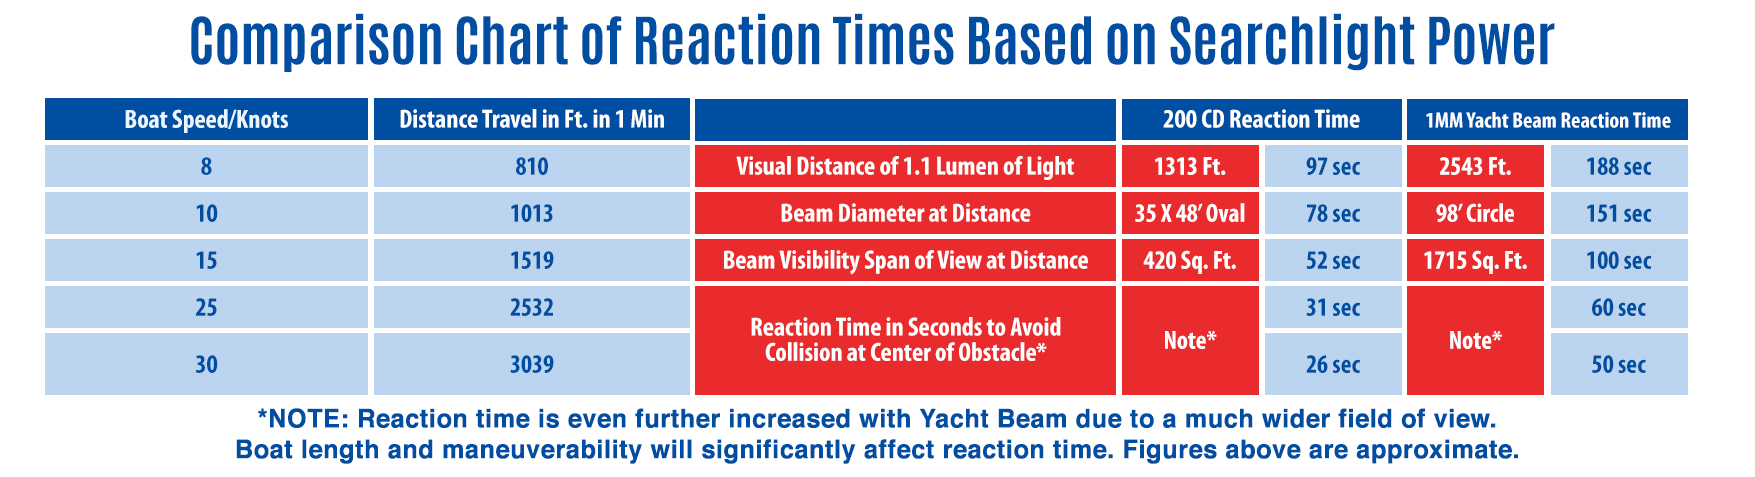 Comparison Chart of Reaction Times Based on Searchlight Power